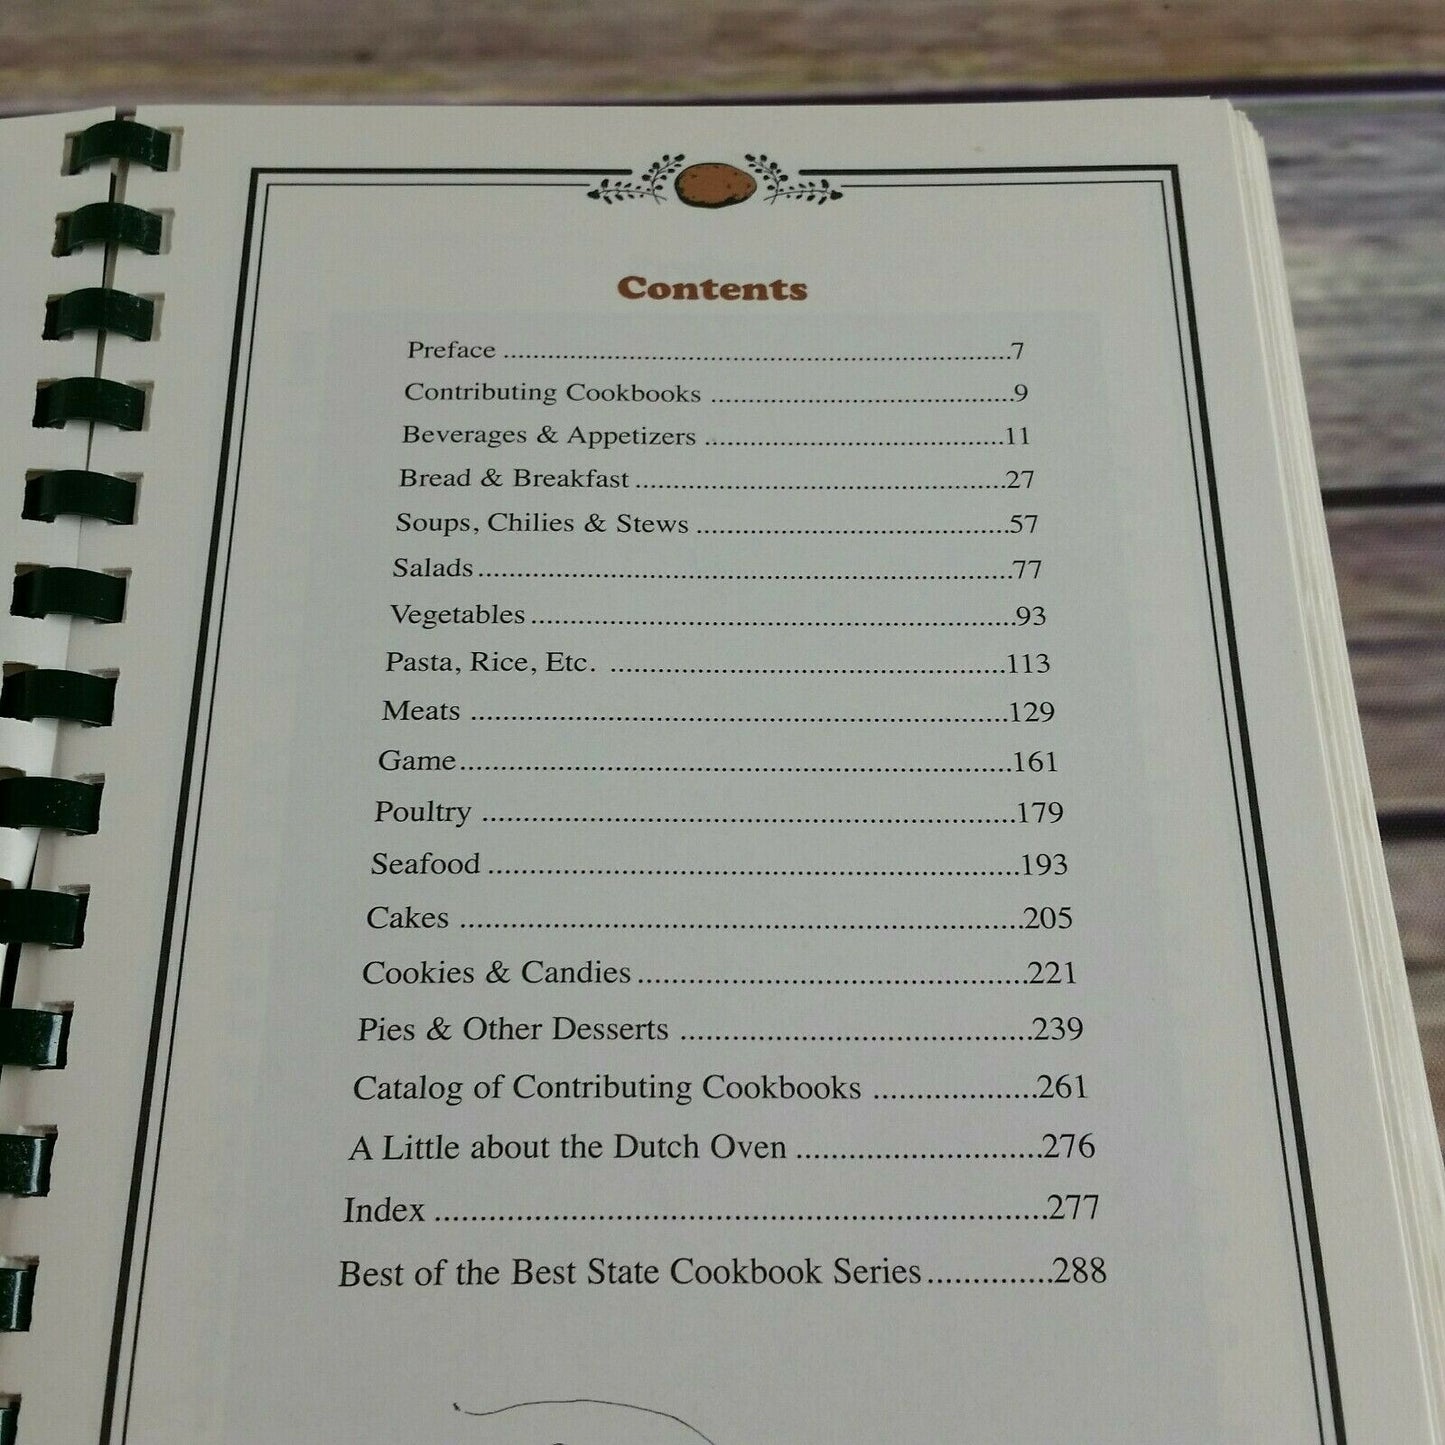 Best of the Best From Idaho Cookbook Recipes Gwen McKee Barbara Moseley 2003